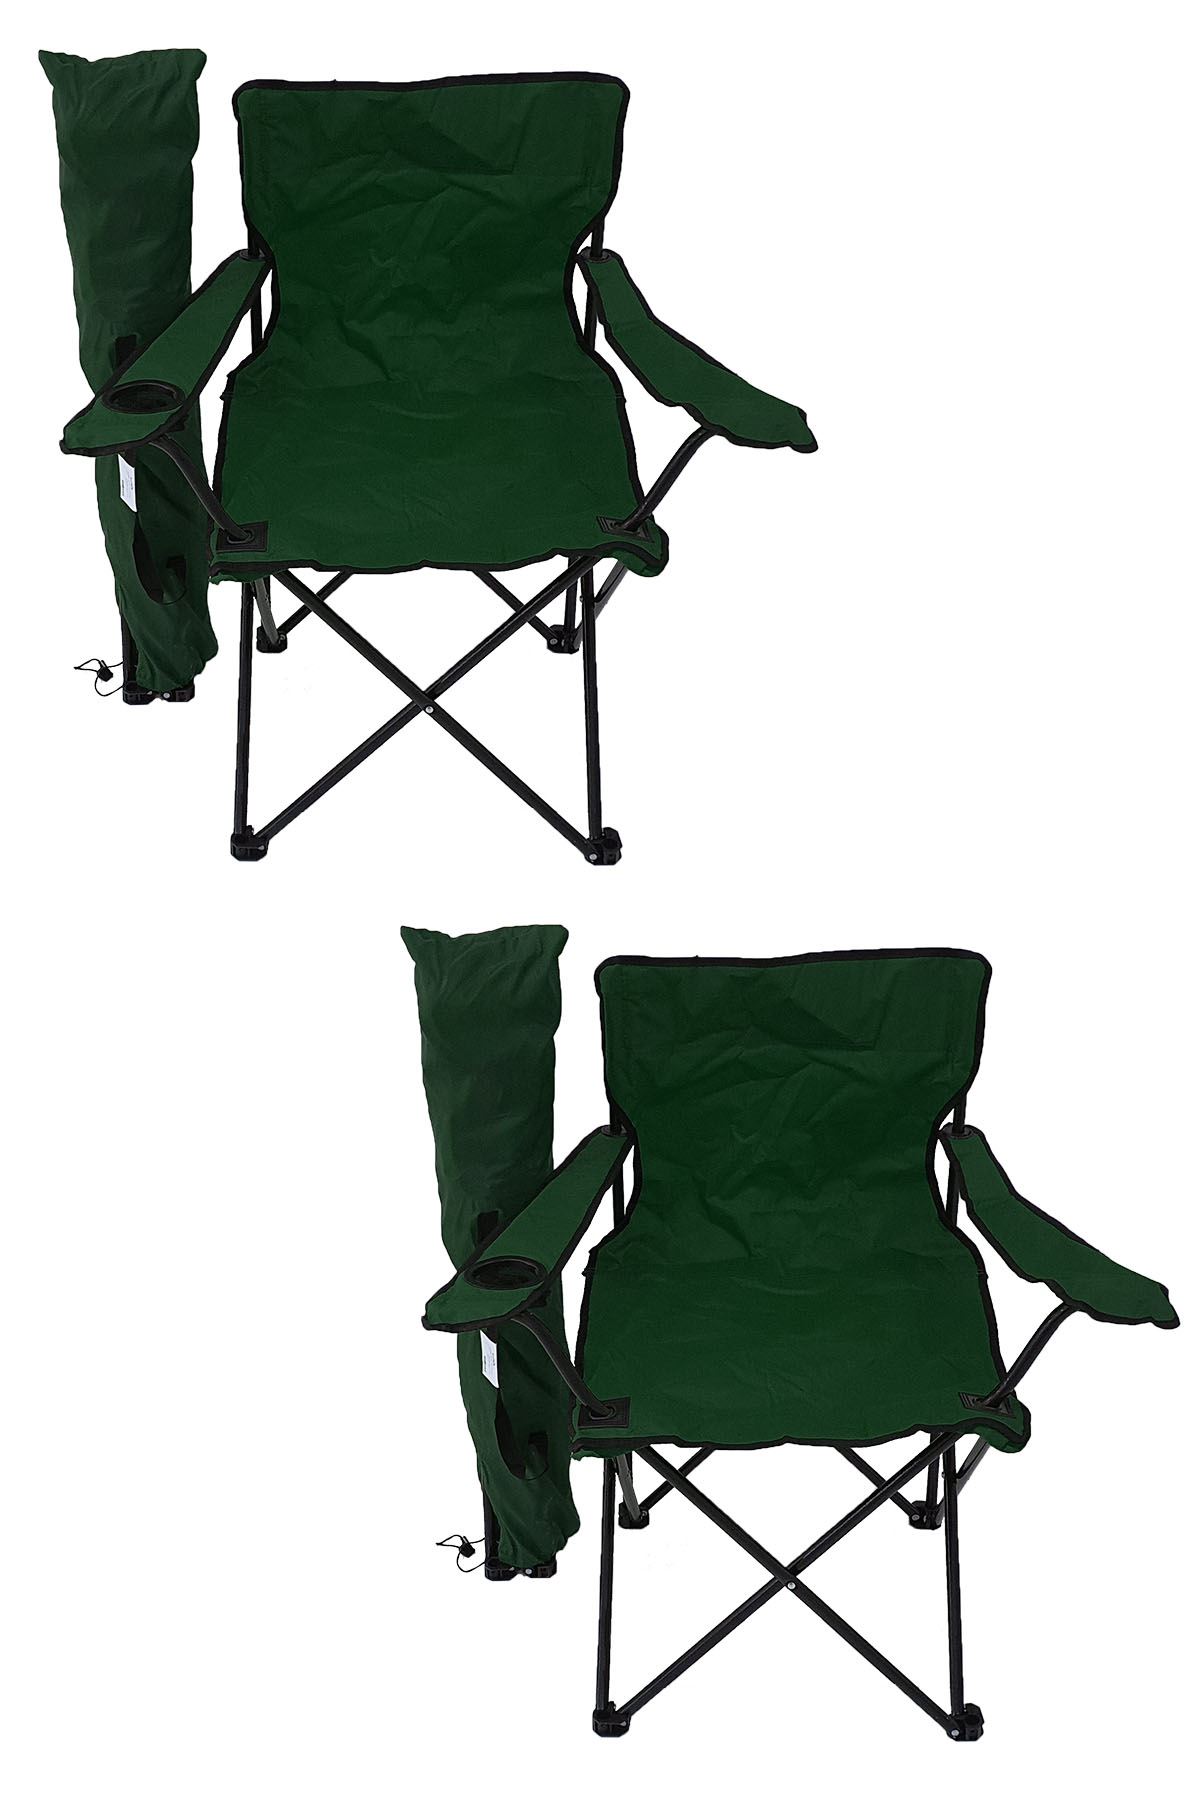 Bofigo 2 Pcs Camping Chair Picnic Chair Folding Chair Camping Chair with Carrying Bag Green